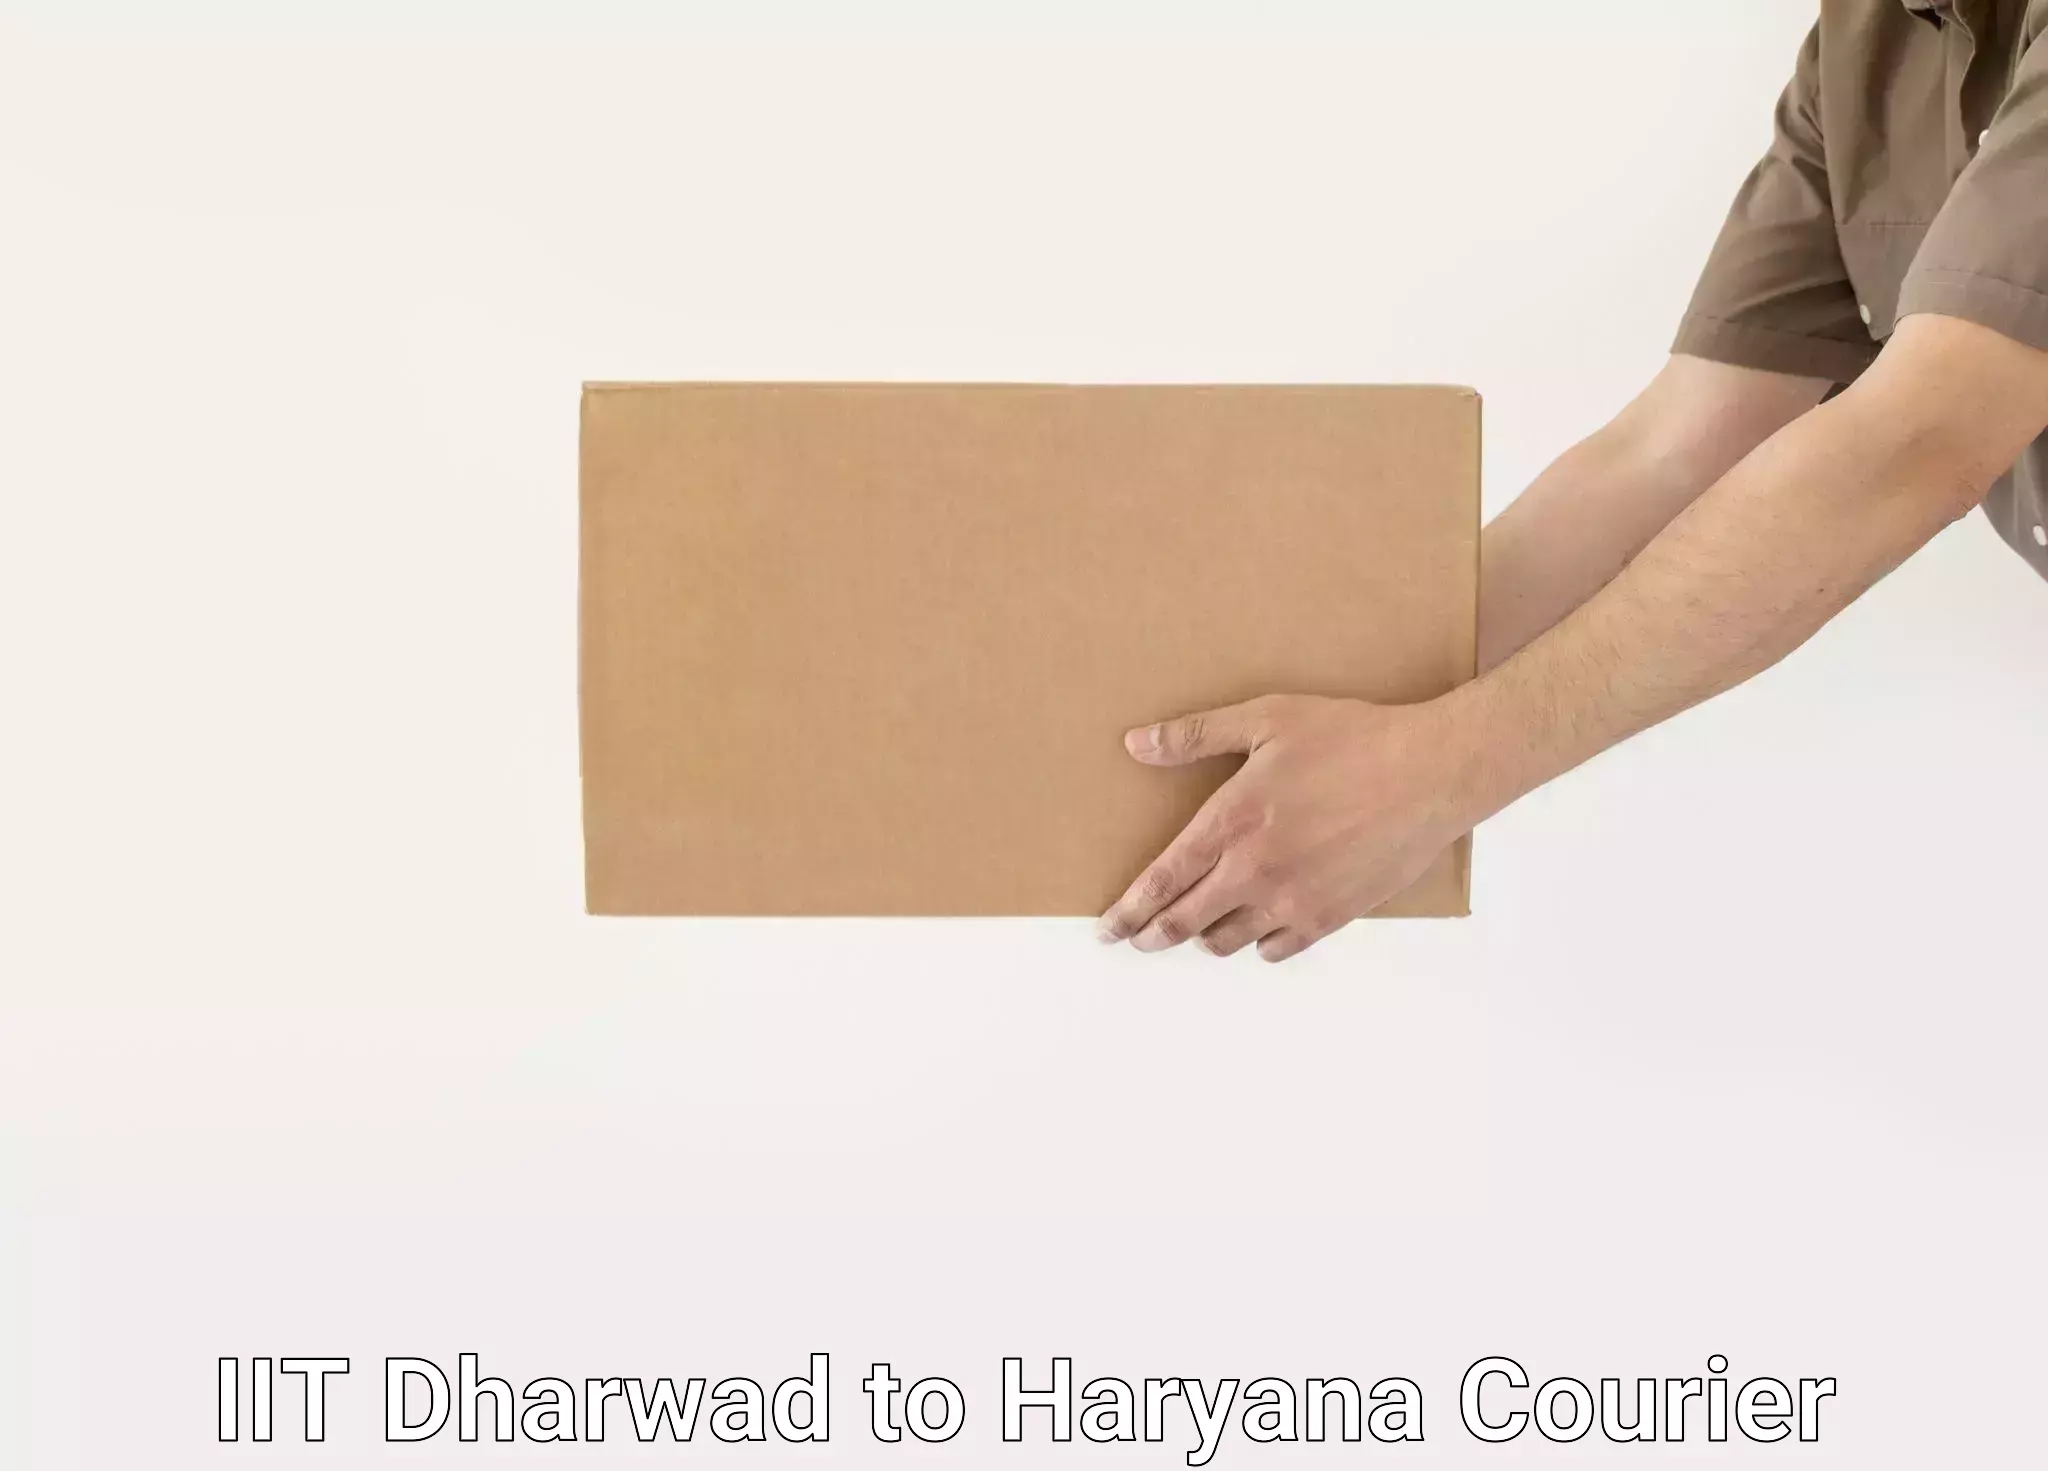 Moving and handling services IIT Dharwad to Haryana